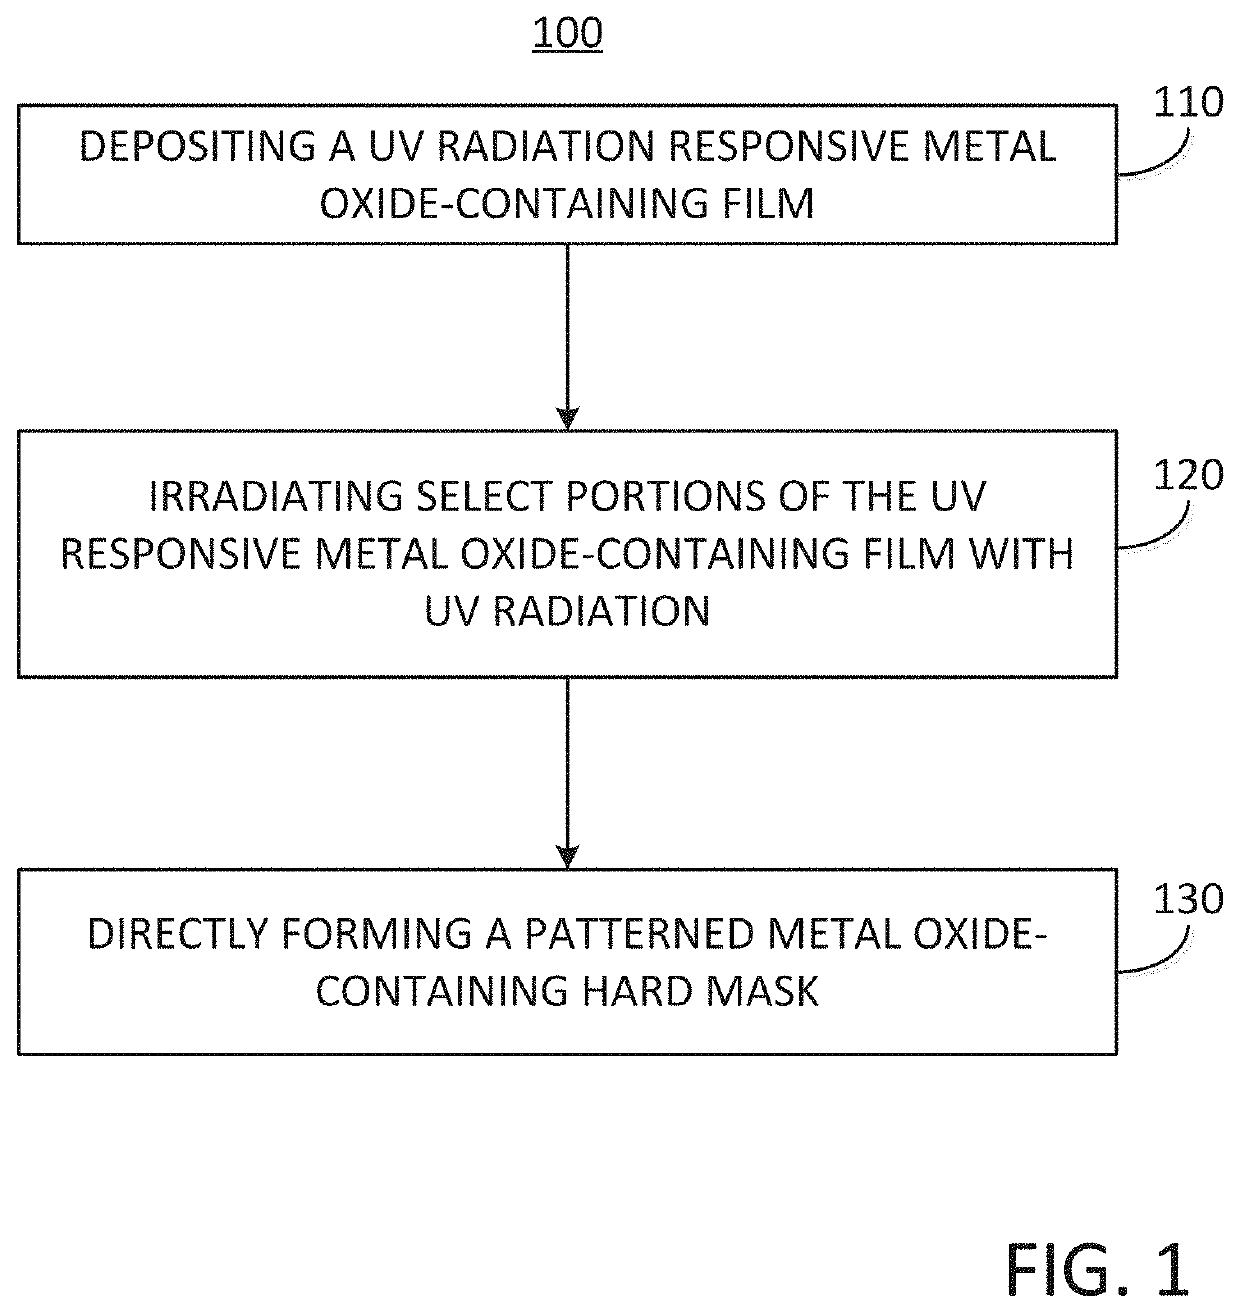 Method for forming an ultraviolet radiation responsive metal oxide-containing film